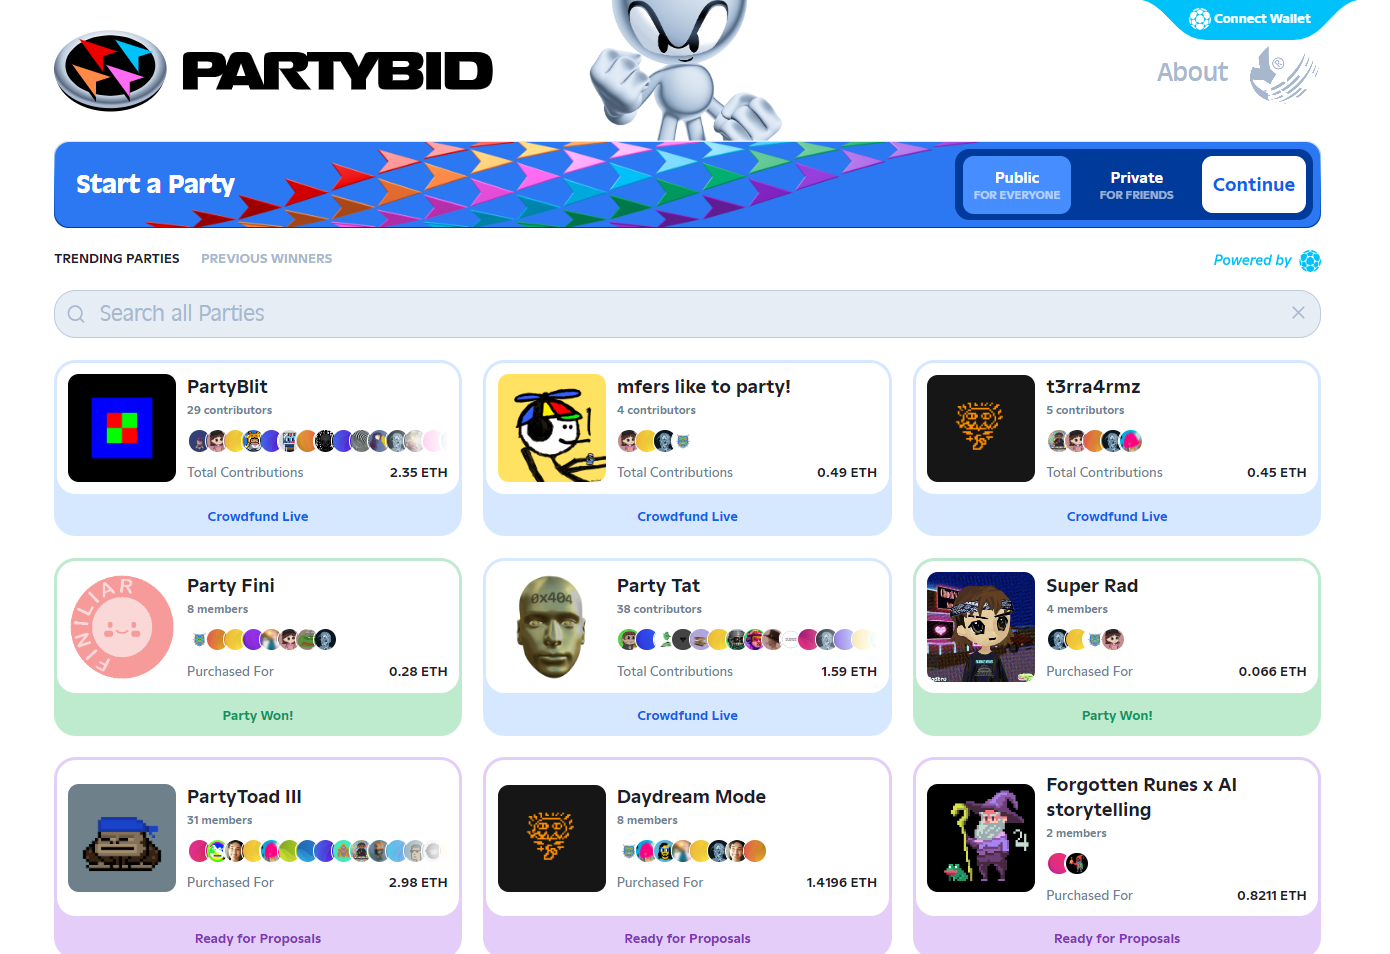 Partybid Evolved 🥳 - By William M. Peaster